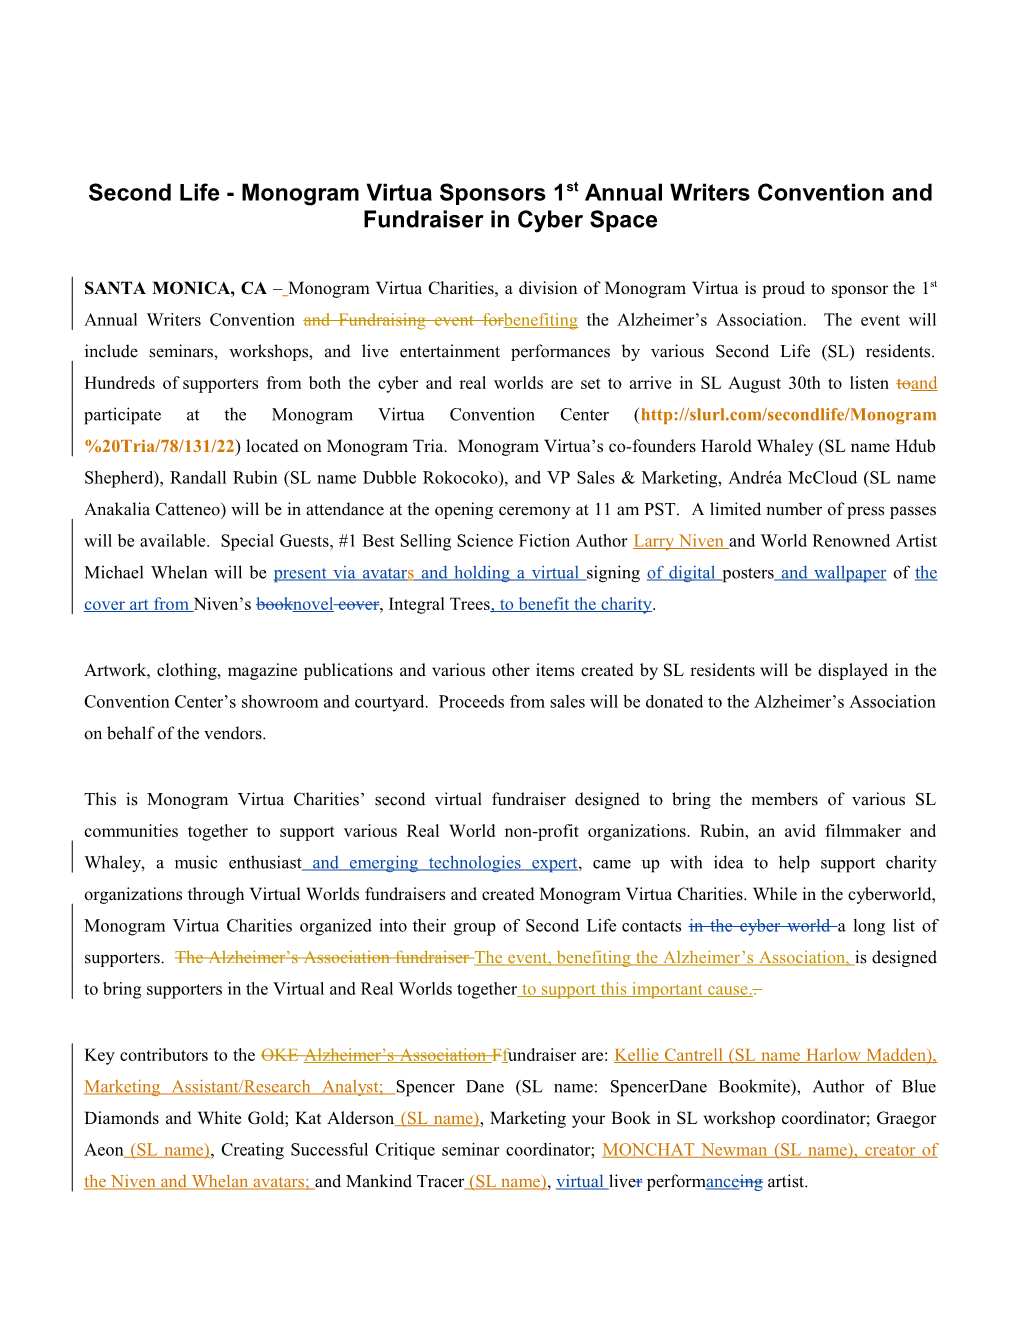 Second Life - Monogram Virtua Sponsors 1St Annual Writers Convention and Fundraiser In